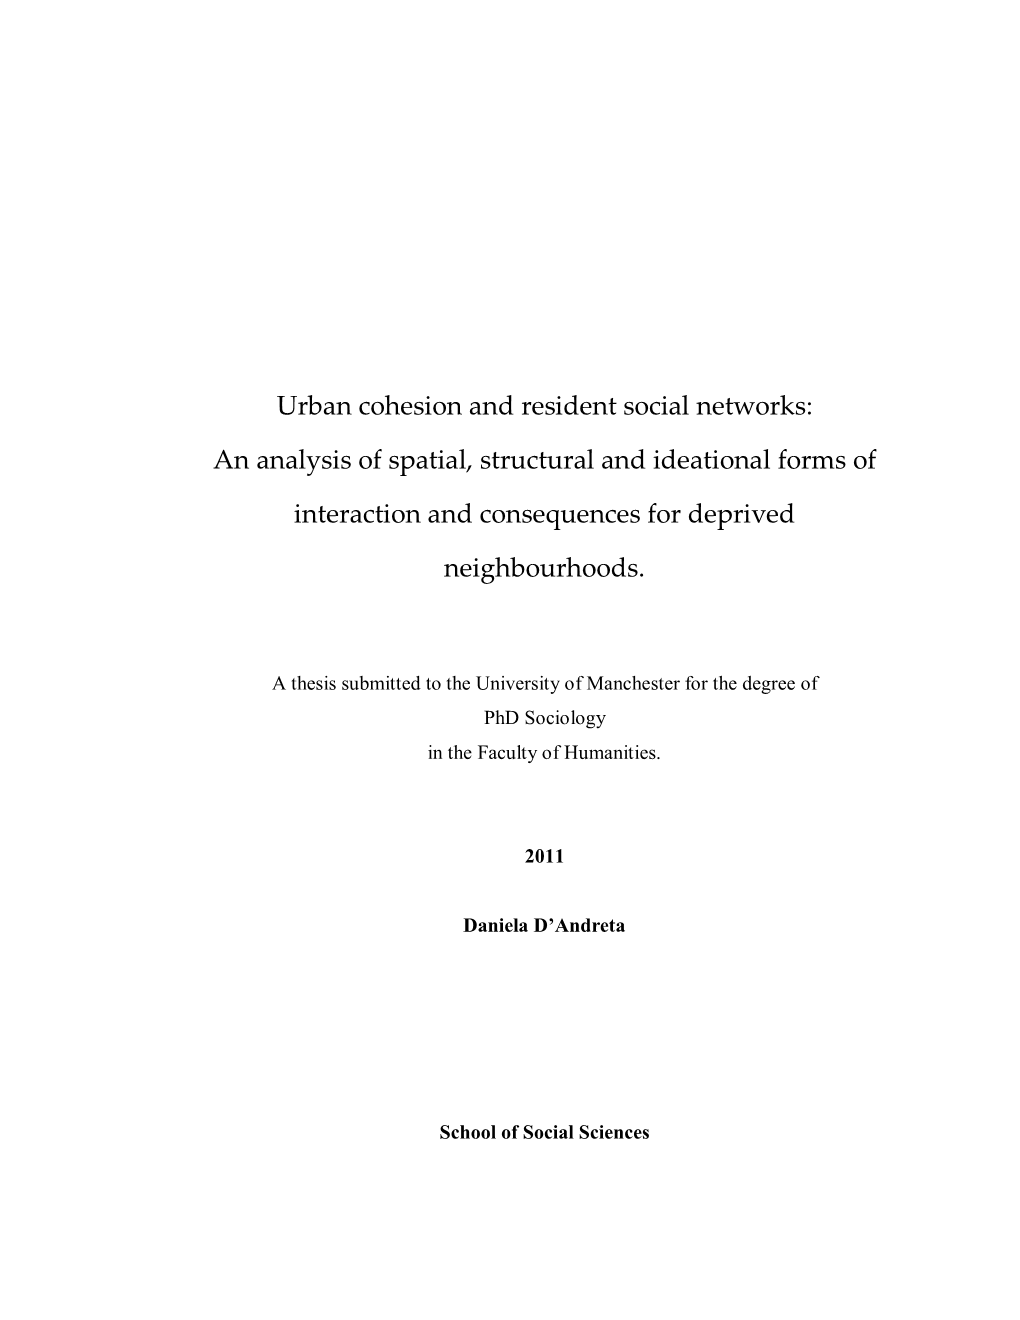 Urban Cohesion and Resident Social Networks